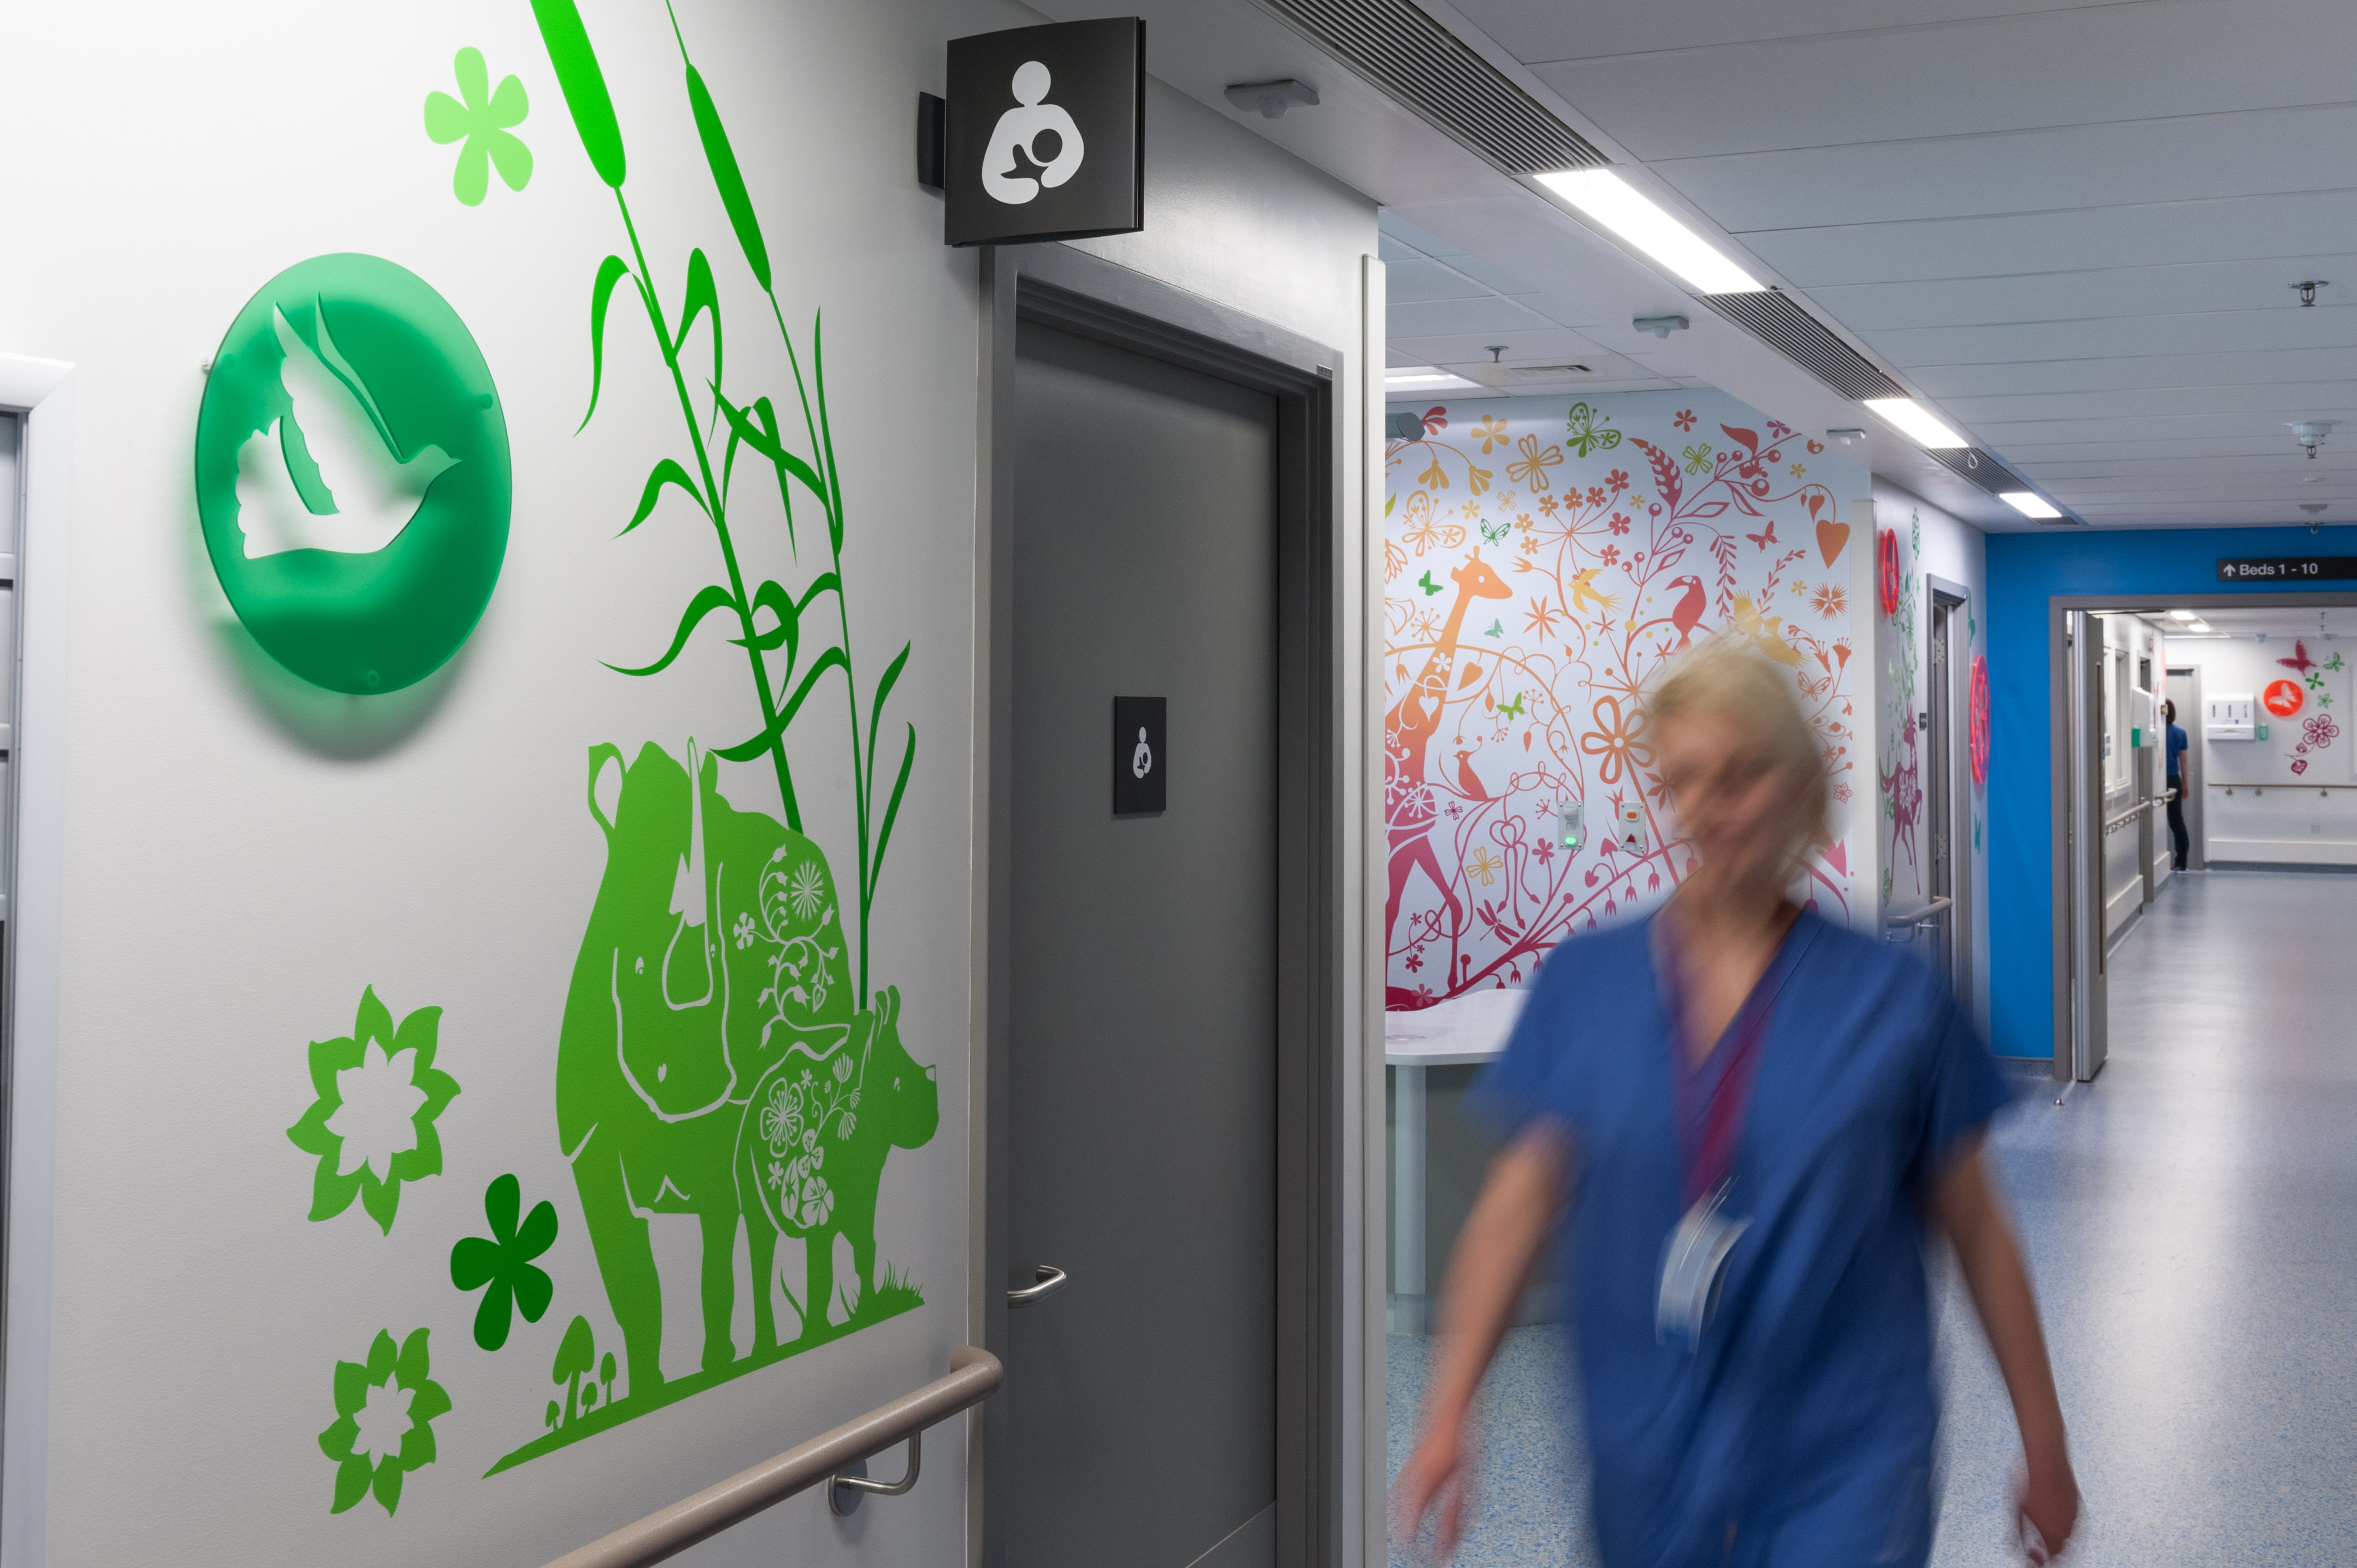 Royal London Hospital installation completed